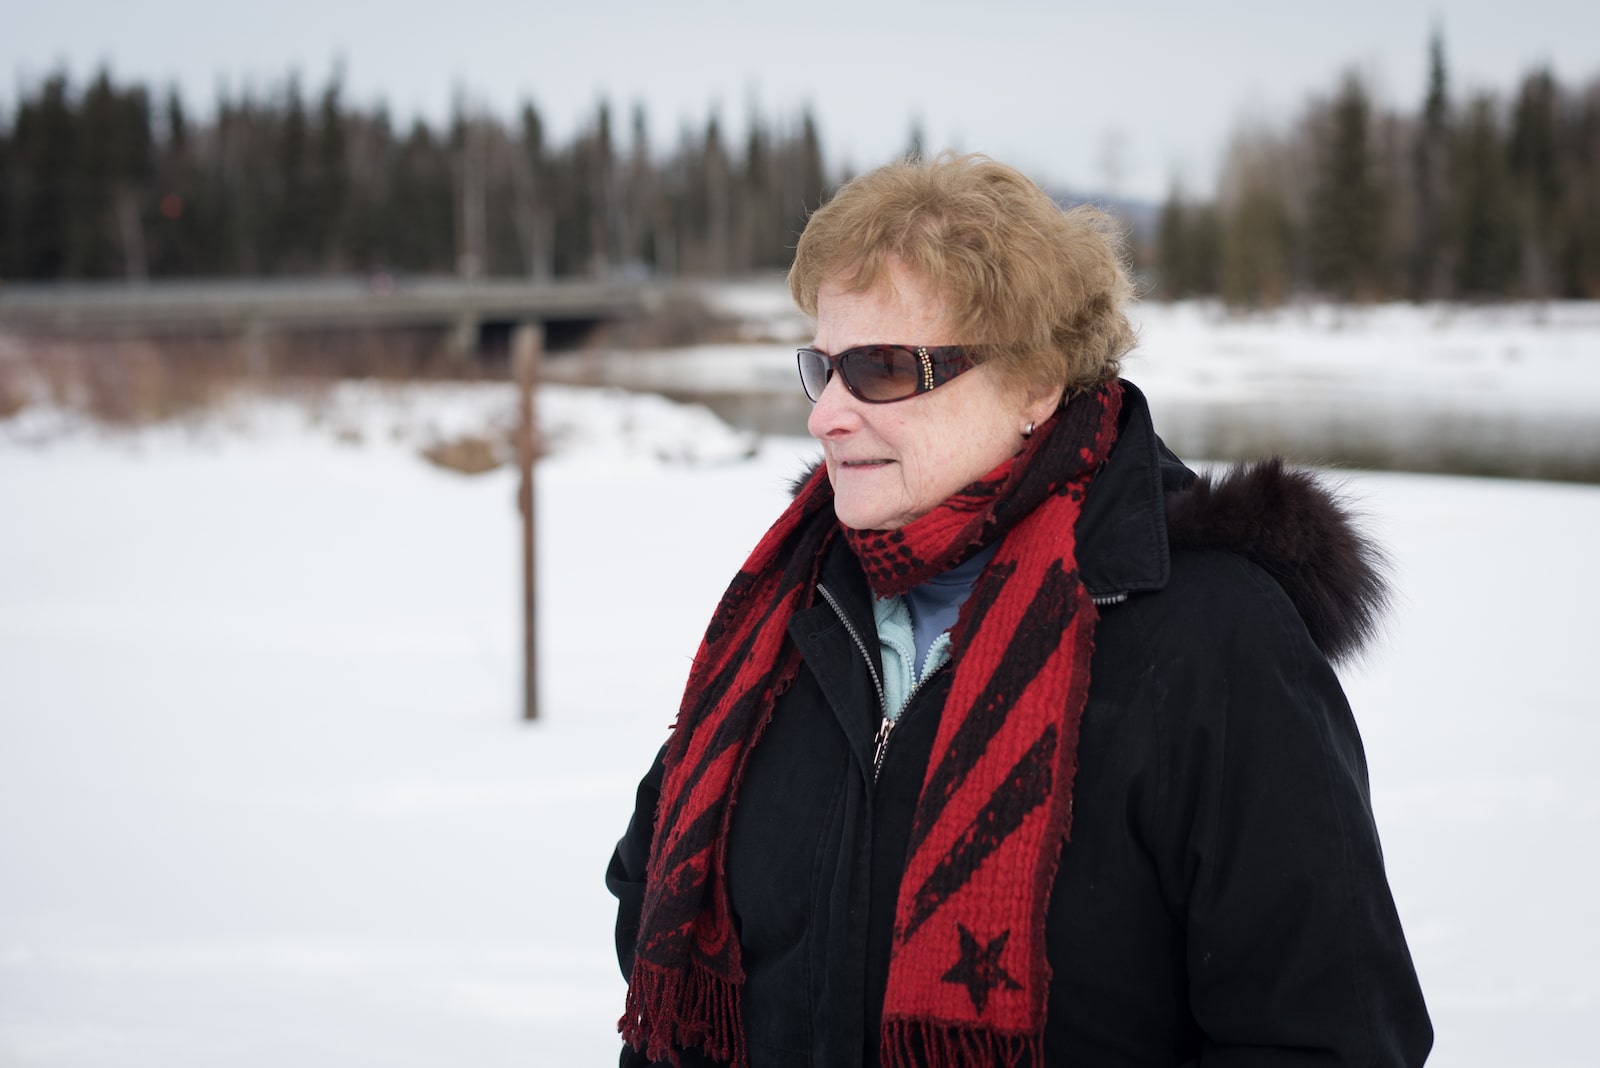 a woman in a red scarf and sunglasses on a snowy day